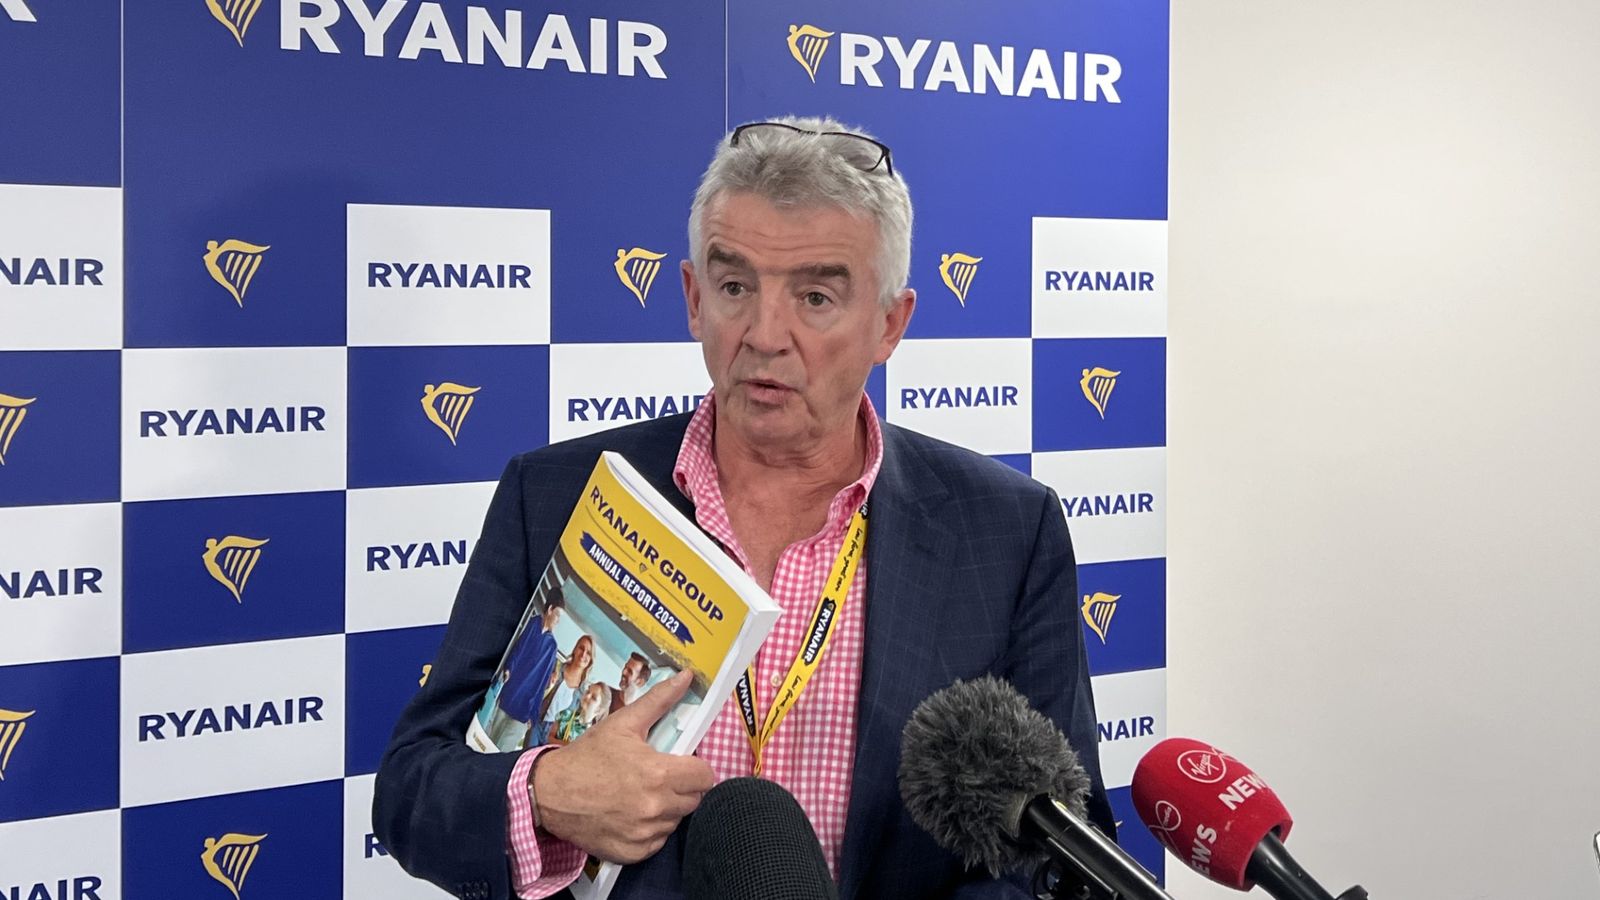 Boeing safety: Ryanair rues 'minor issues' with new Boeing aircraft